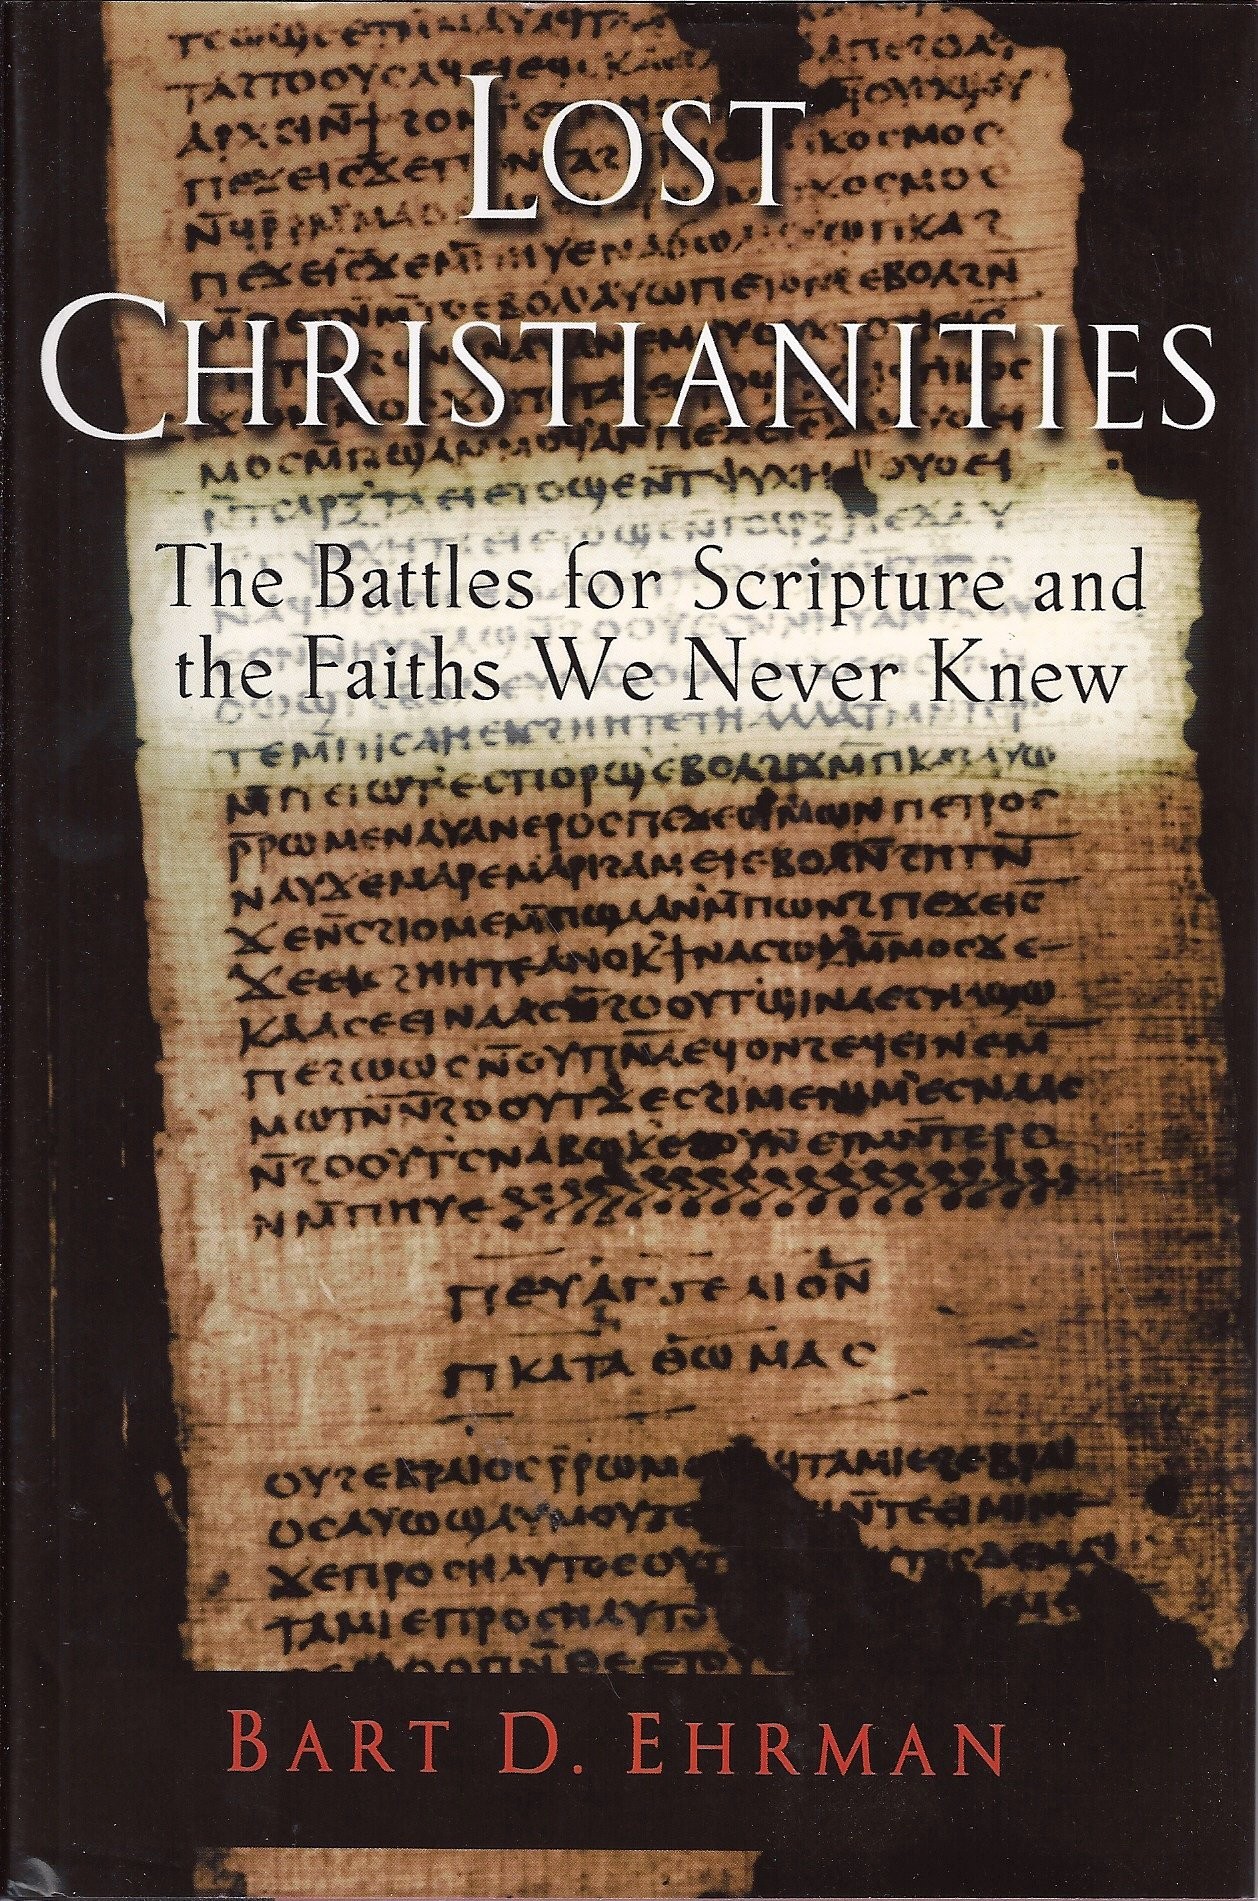 The Lost Christianities: The Battles for Scripture and the Faiths We Never Knew